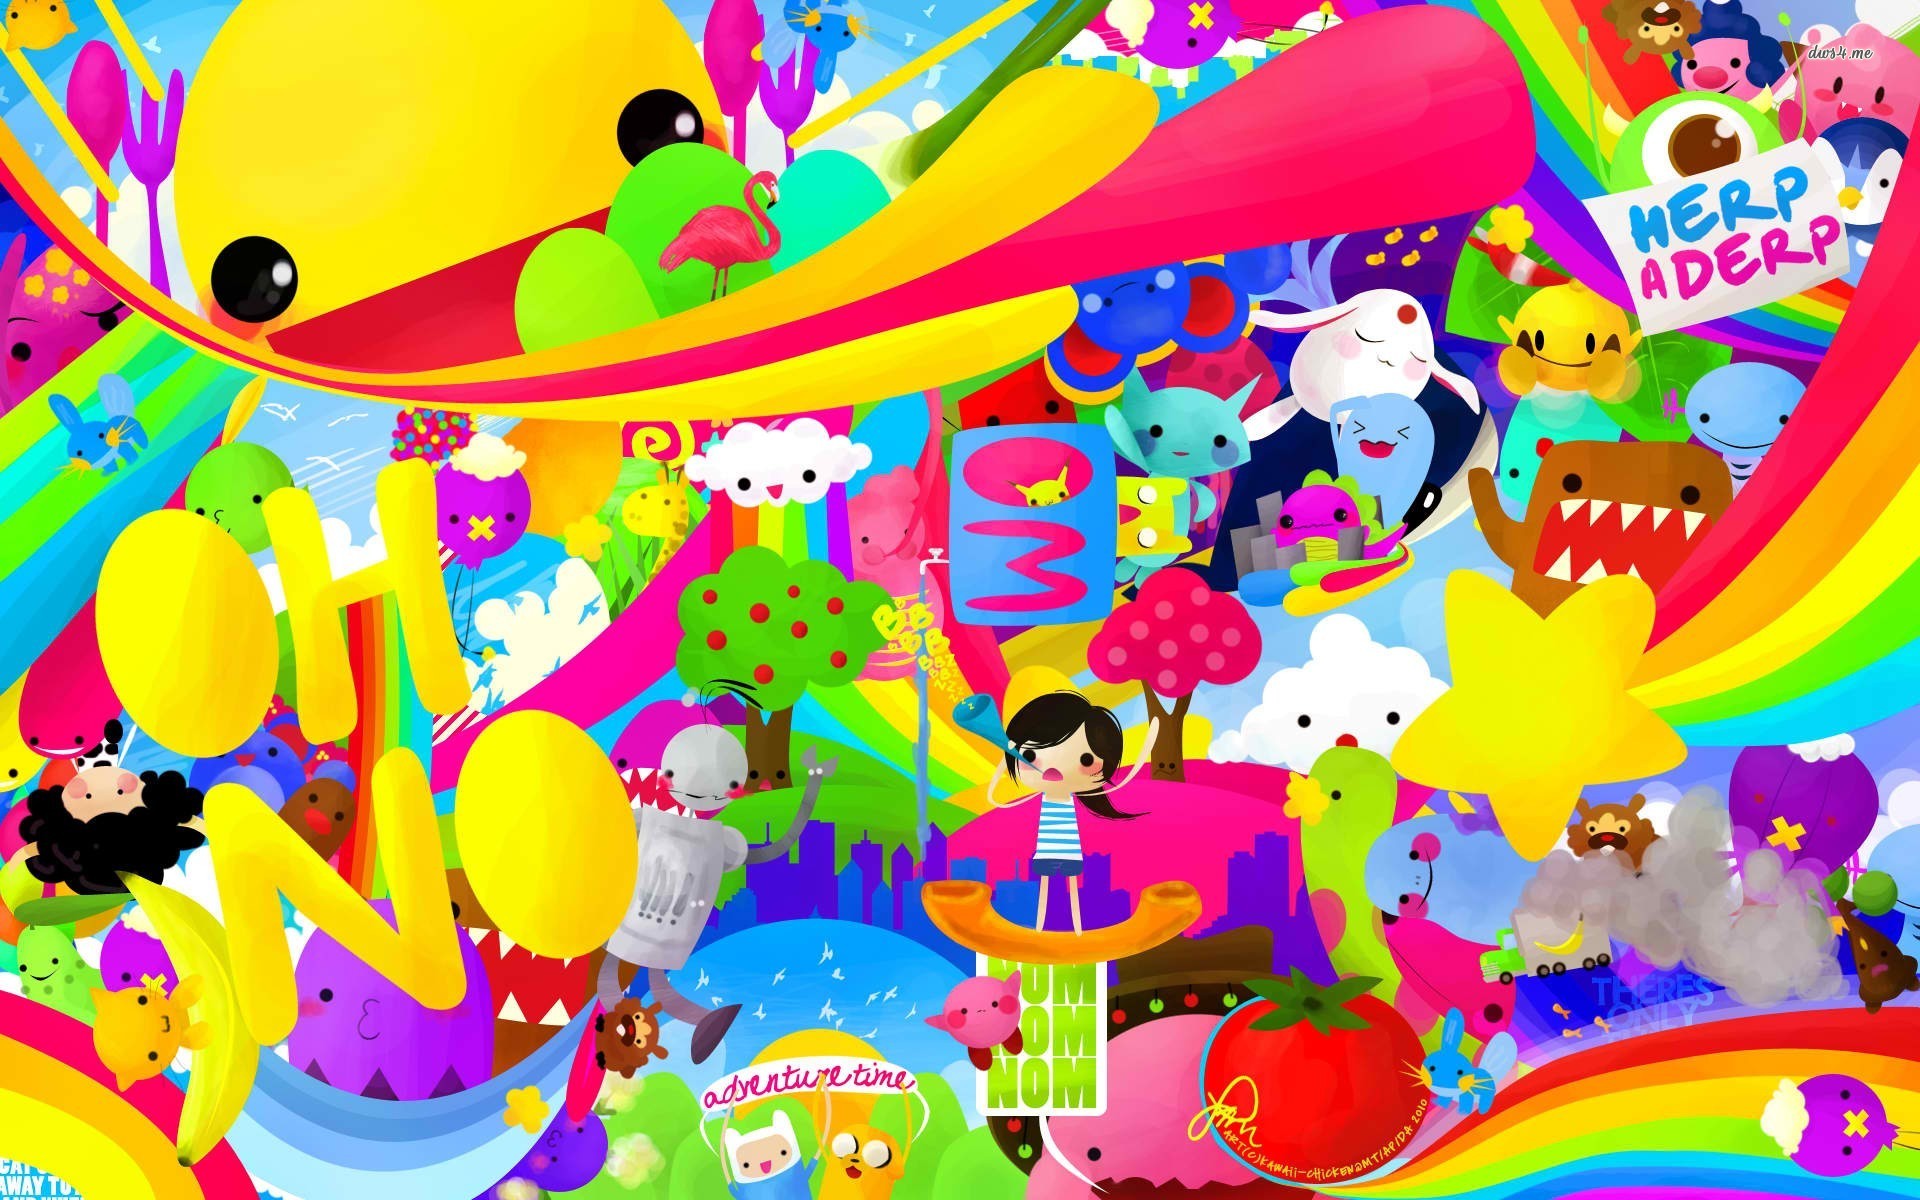 Colorful Wallpapers Best Wallpapers - Colorful Cartoon Wallpaper Hd -  1920x1200 Wallpaper 